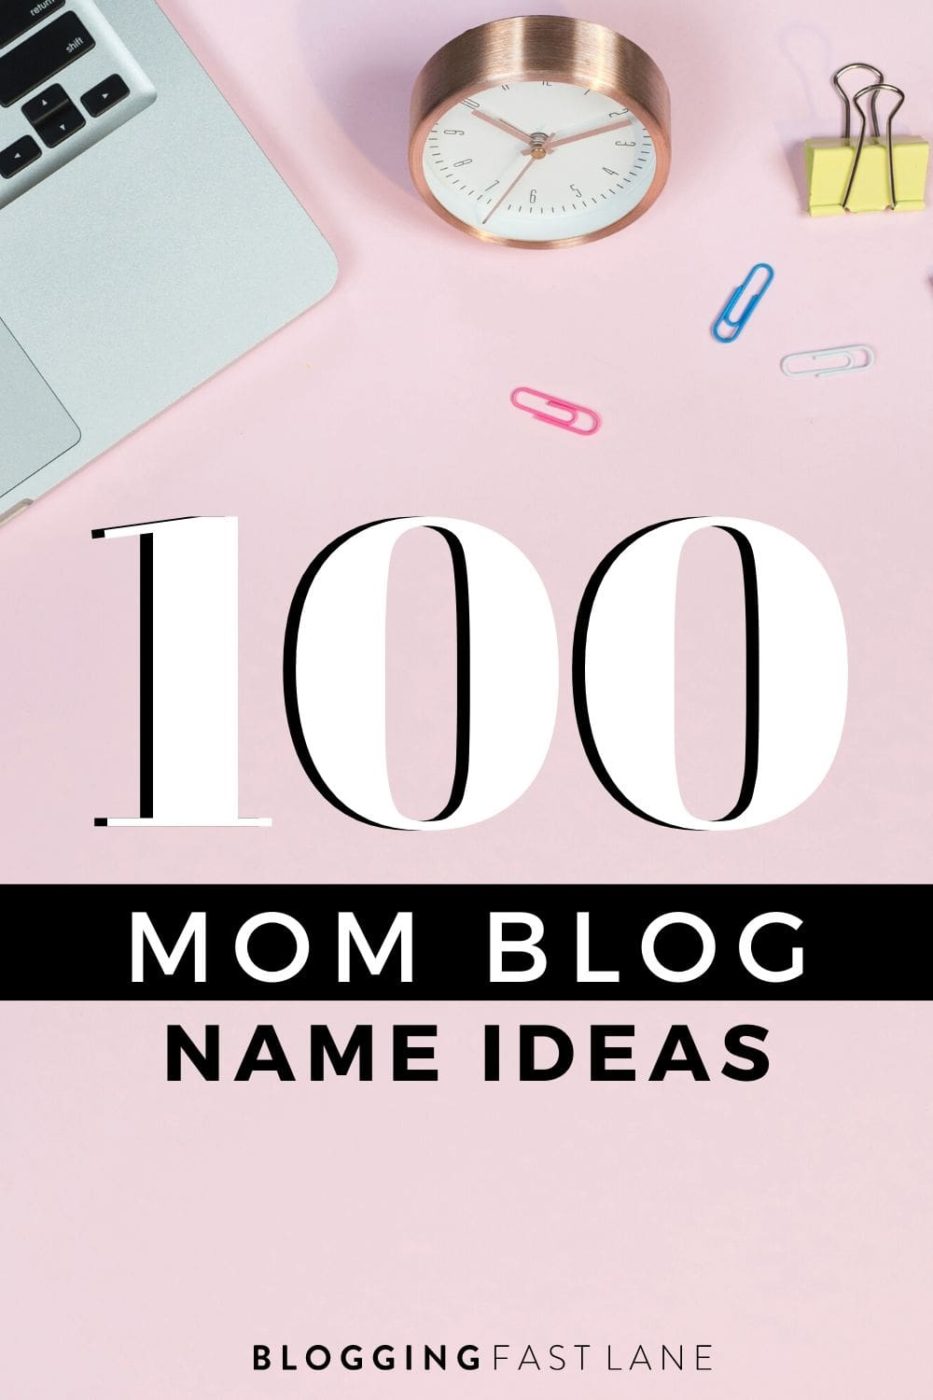 Mom Blog Names | Stuck trying to come up with a mom blog name? Check out our complete guide on how to name your mom blog, plus 100 ideas for inspiration!